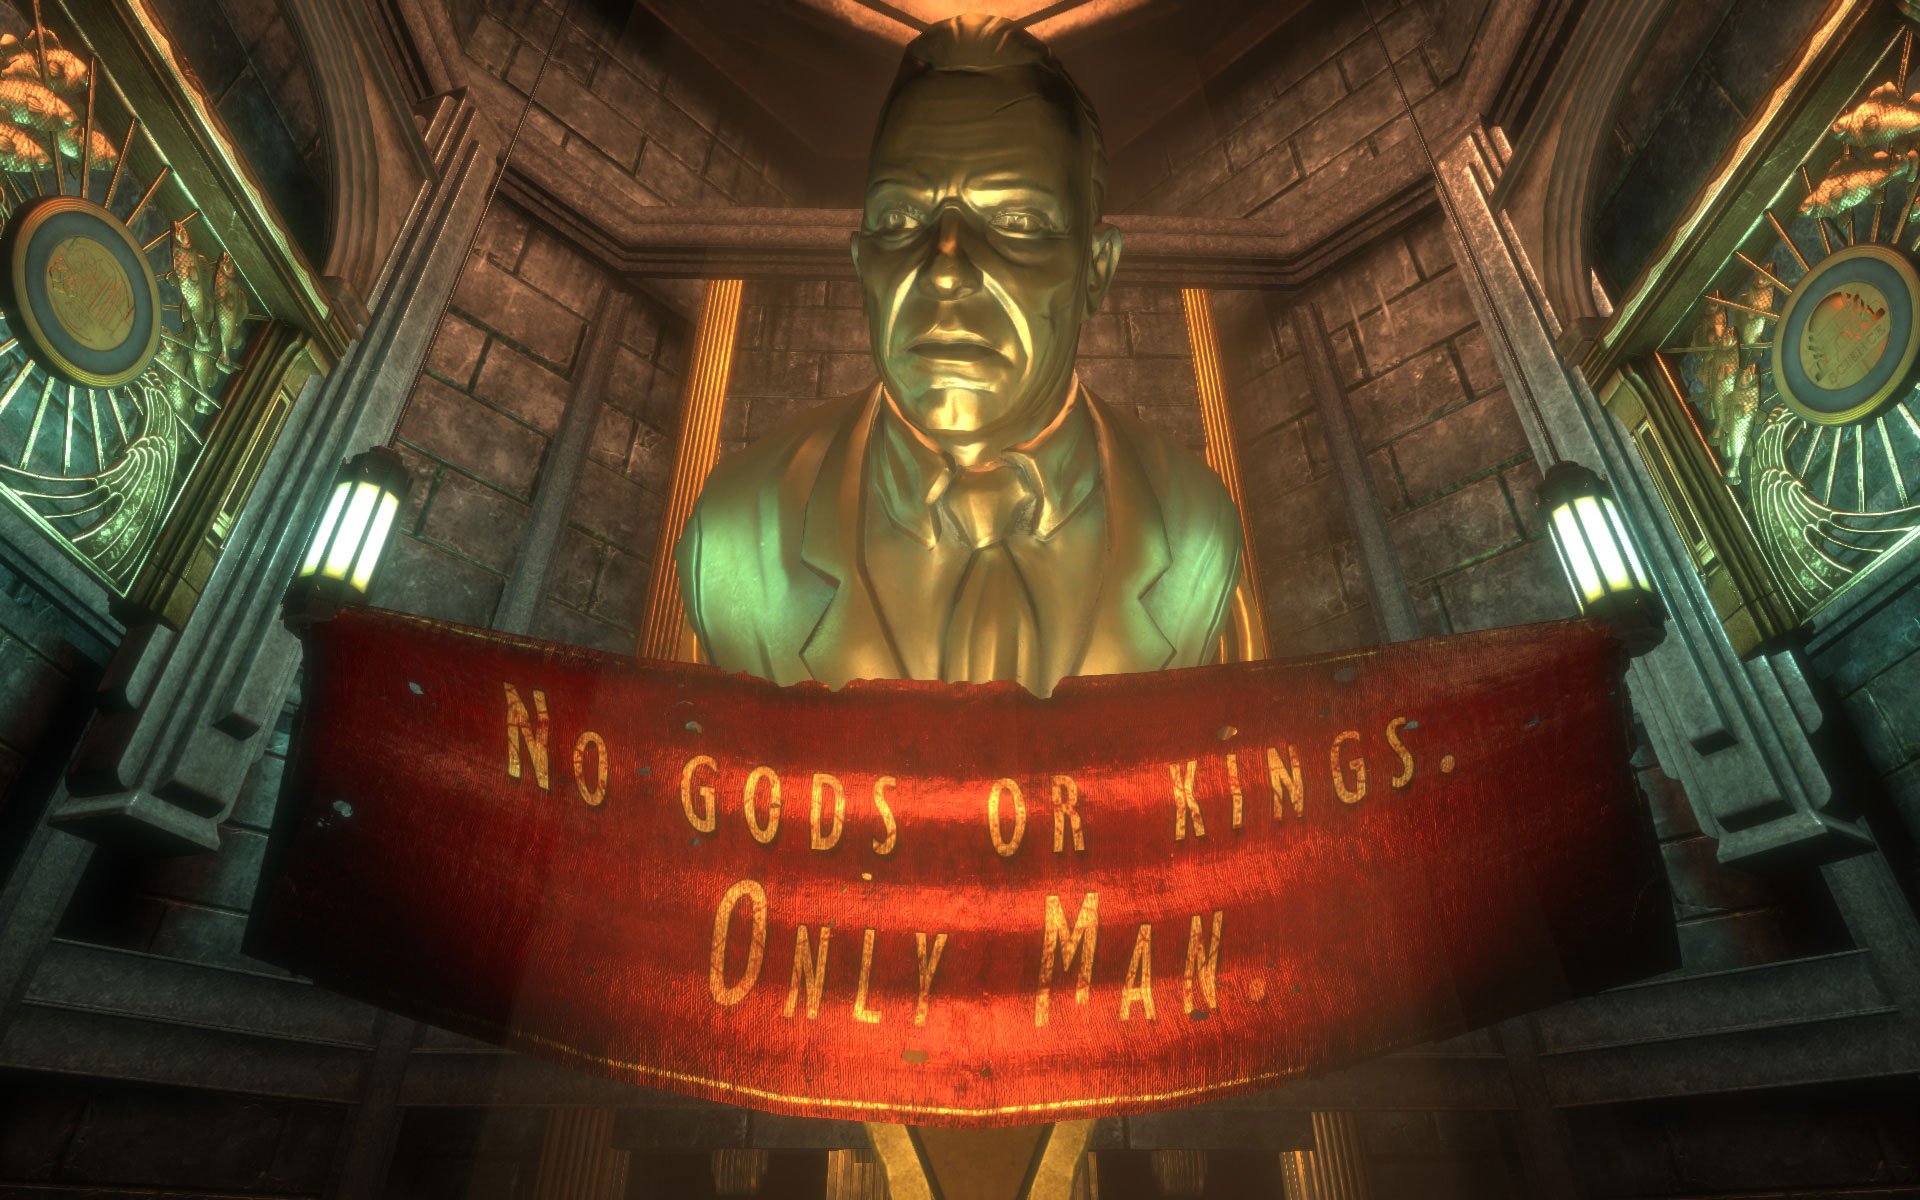 http://image.noelshack.com/fichiers/2016/26/1467231395-bioshock-the-collection.jpg